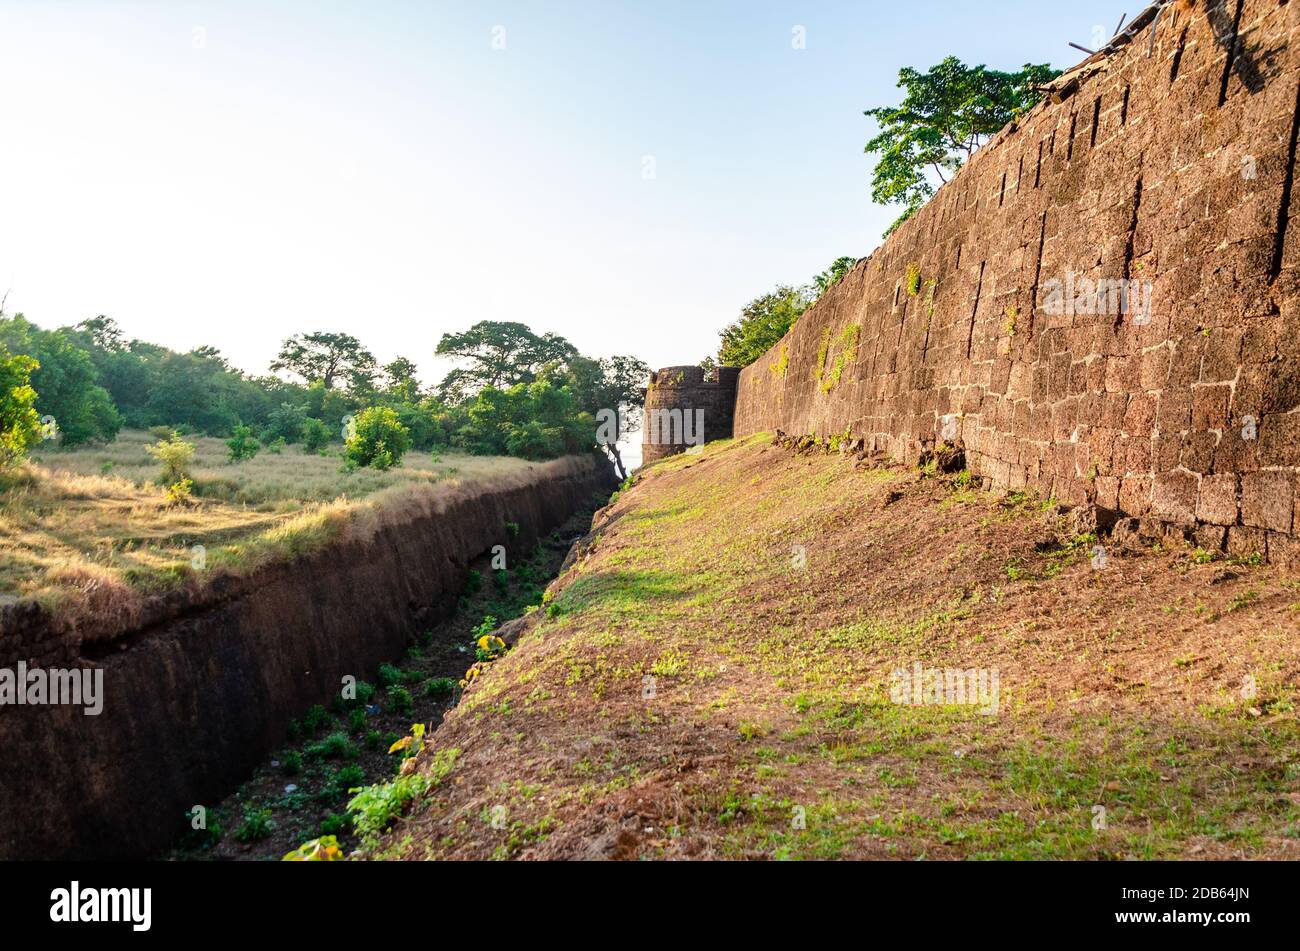 Exterior view of Cabo de Rama Fort surrounded by a moat (Khandak) where crocodiles were said to have been kept for protection from enemy attacks. Stock Photo